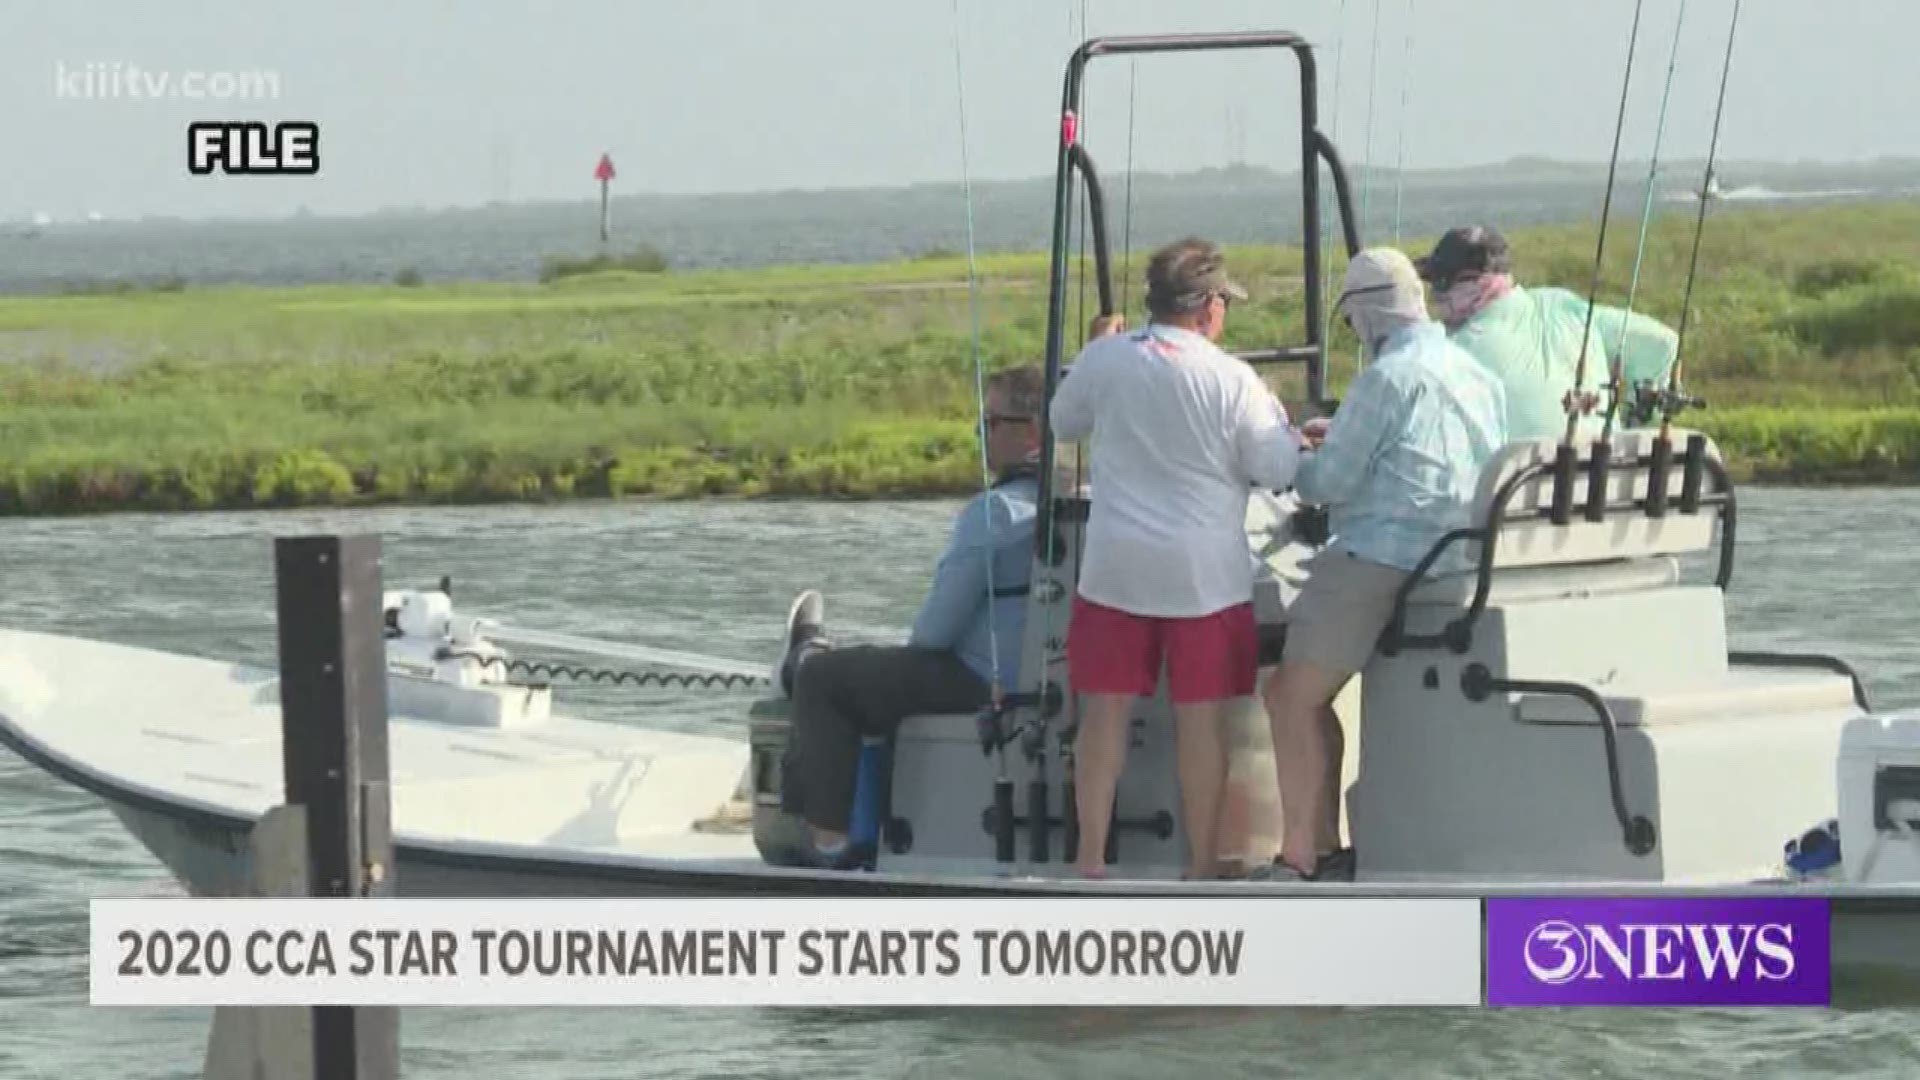 The event is one of the world's largest fishing tournament events and runs from Memorial Day weekend through Labor Day.